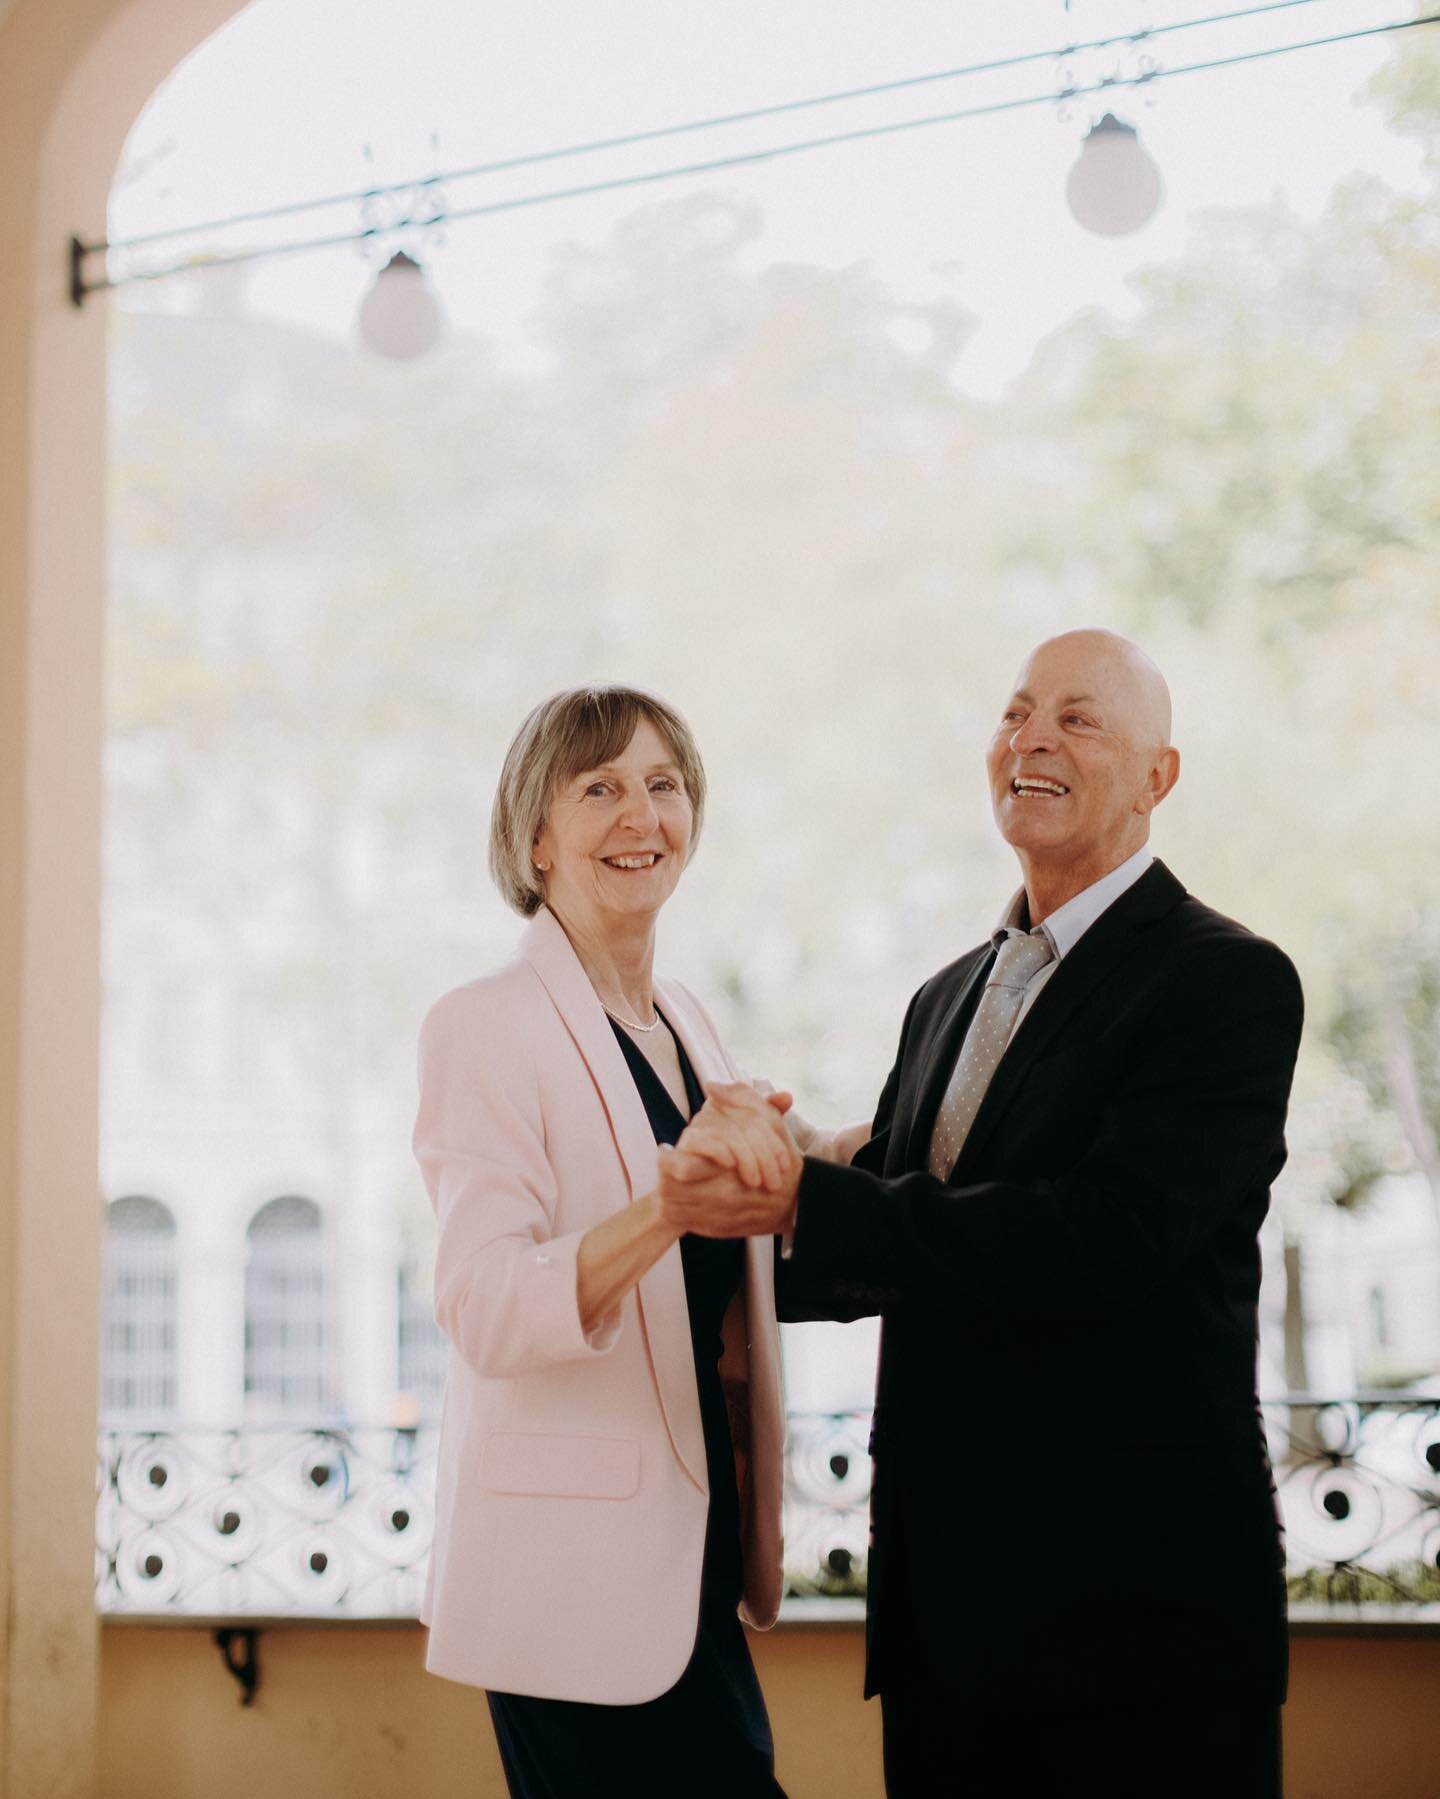 Yo how much I love the grandparents at weddings 😍 They always have a special place in my heart ❤️
This was the song we danced to - say you won&rsquo;t let go - Dance with me until we&rsquo;re grey &amp; old
.
.
.
.
.#outdoorwedding #modernbride #wed